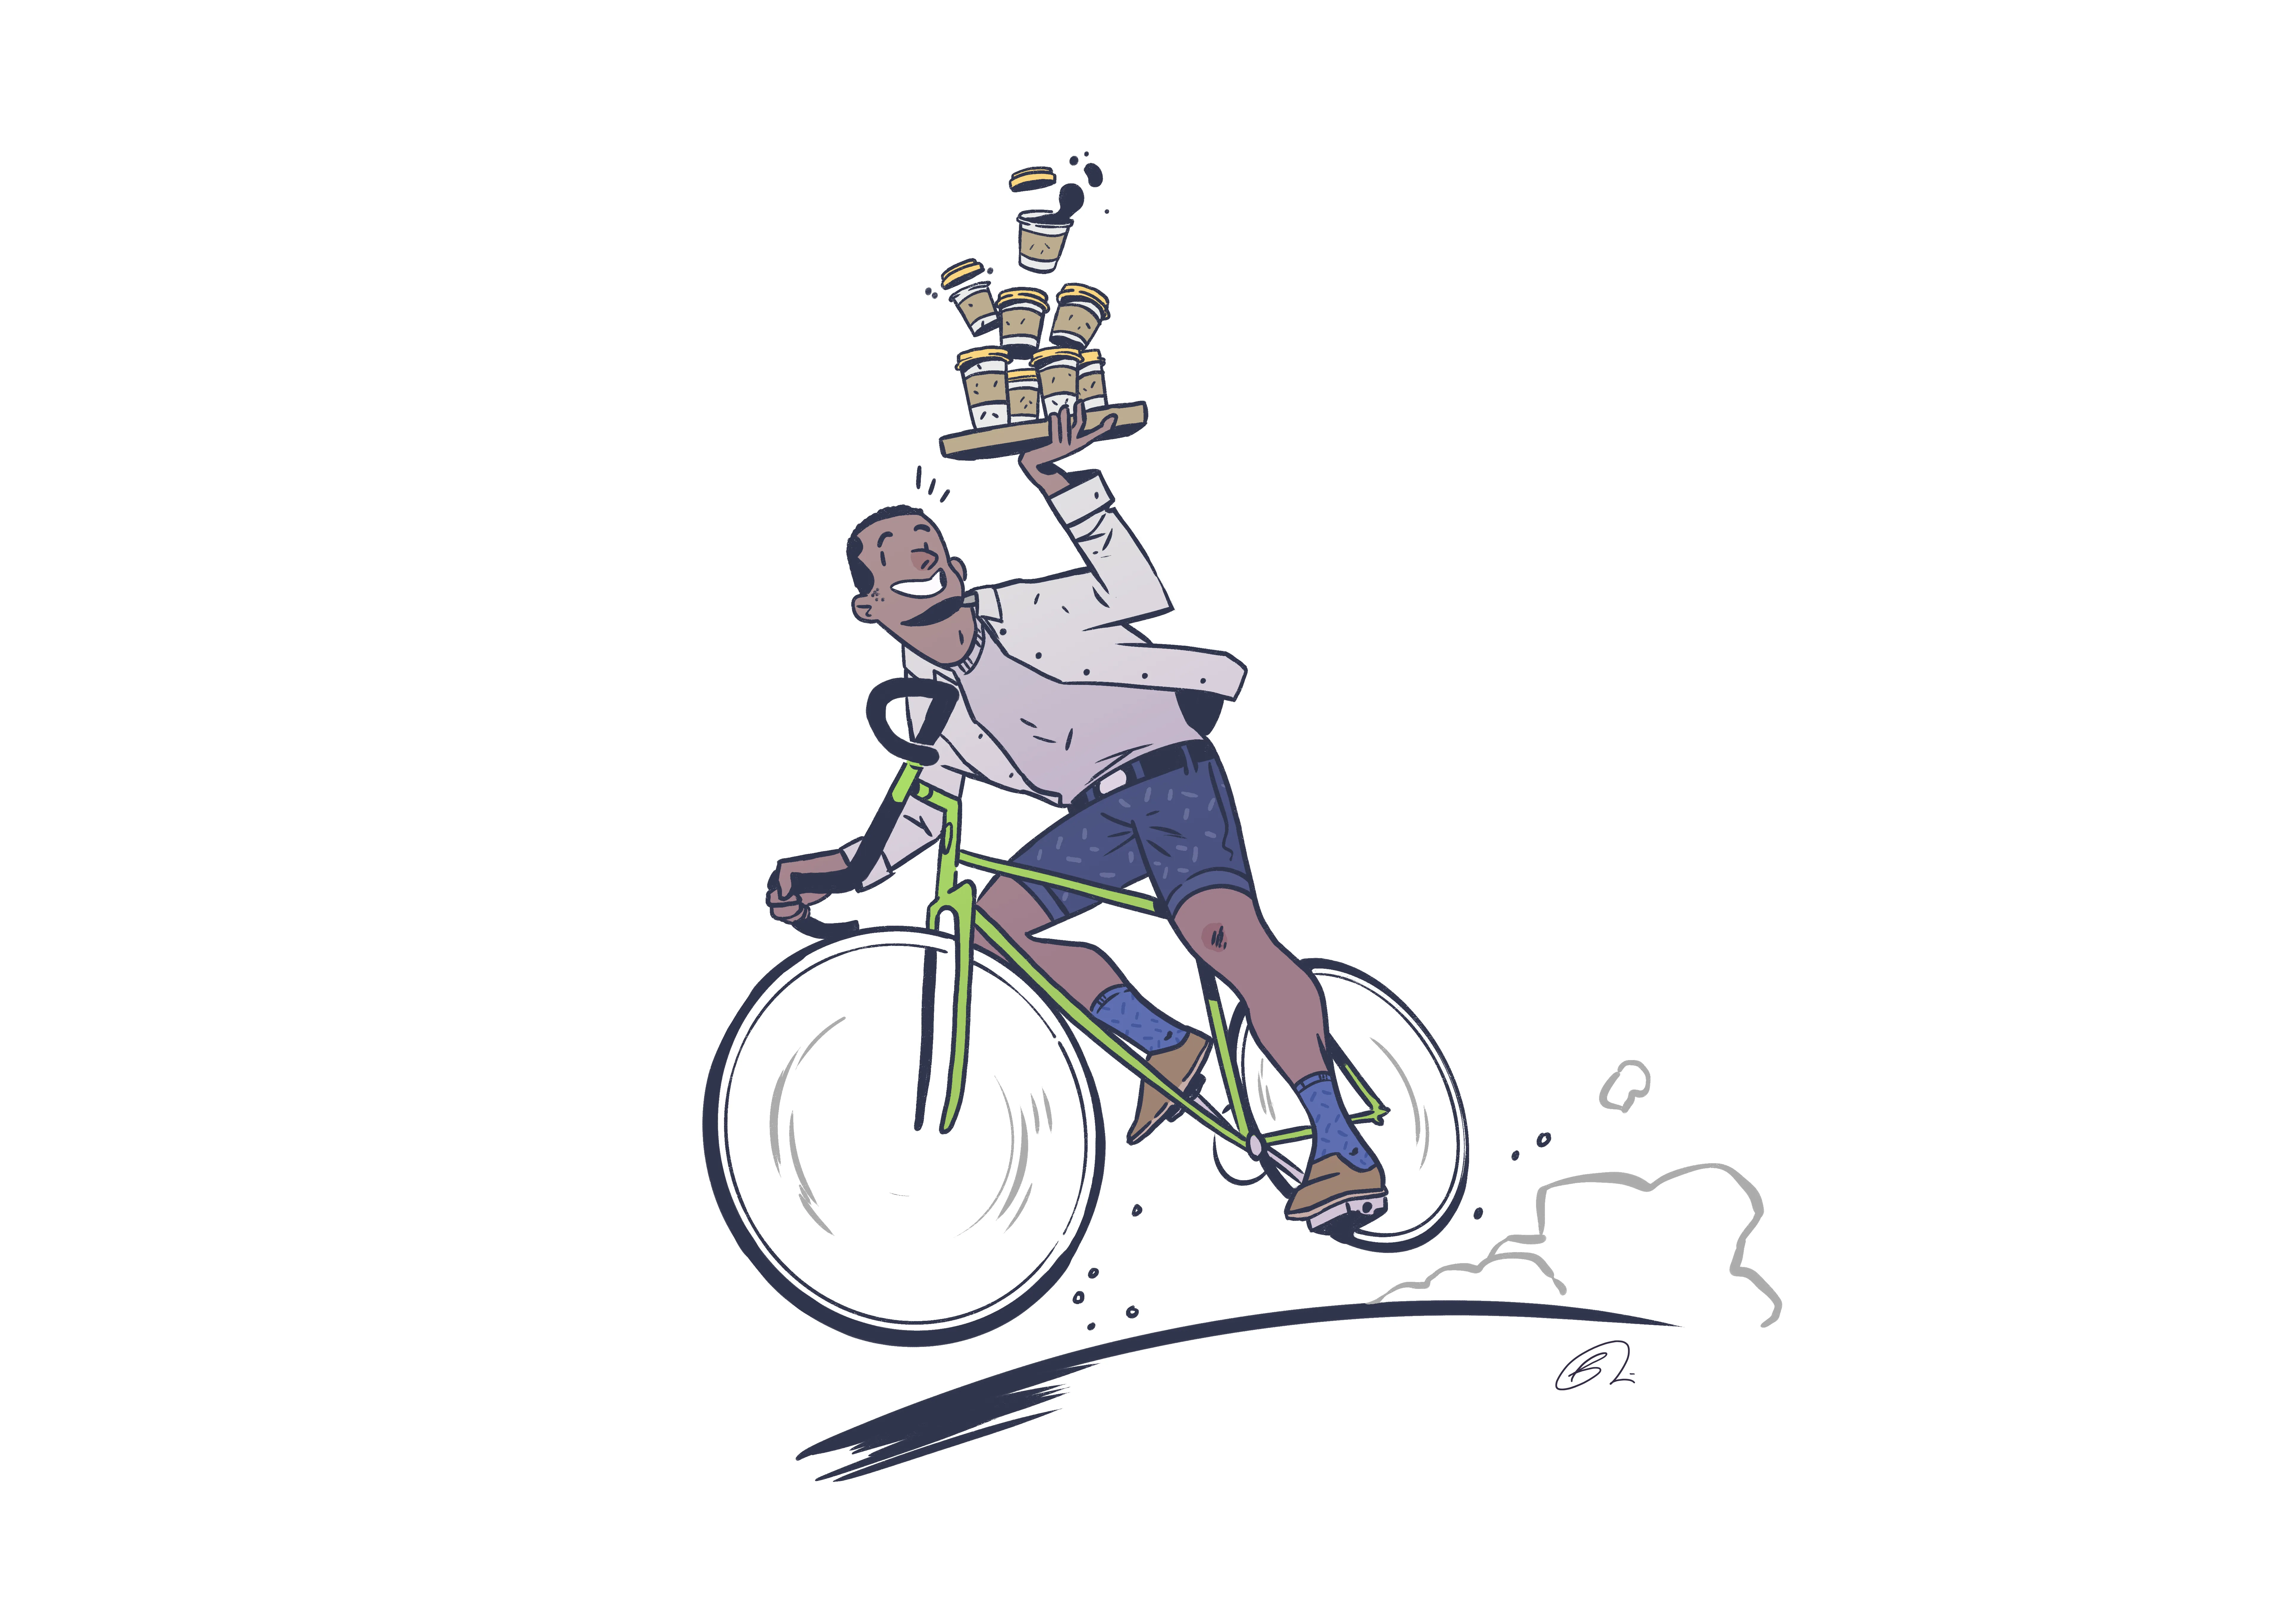 An illustration of a man riding a bicycle while holding a tray of coffees